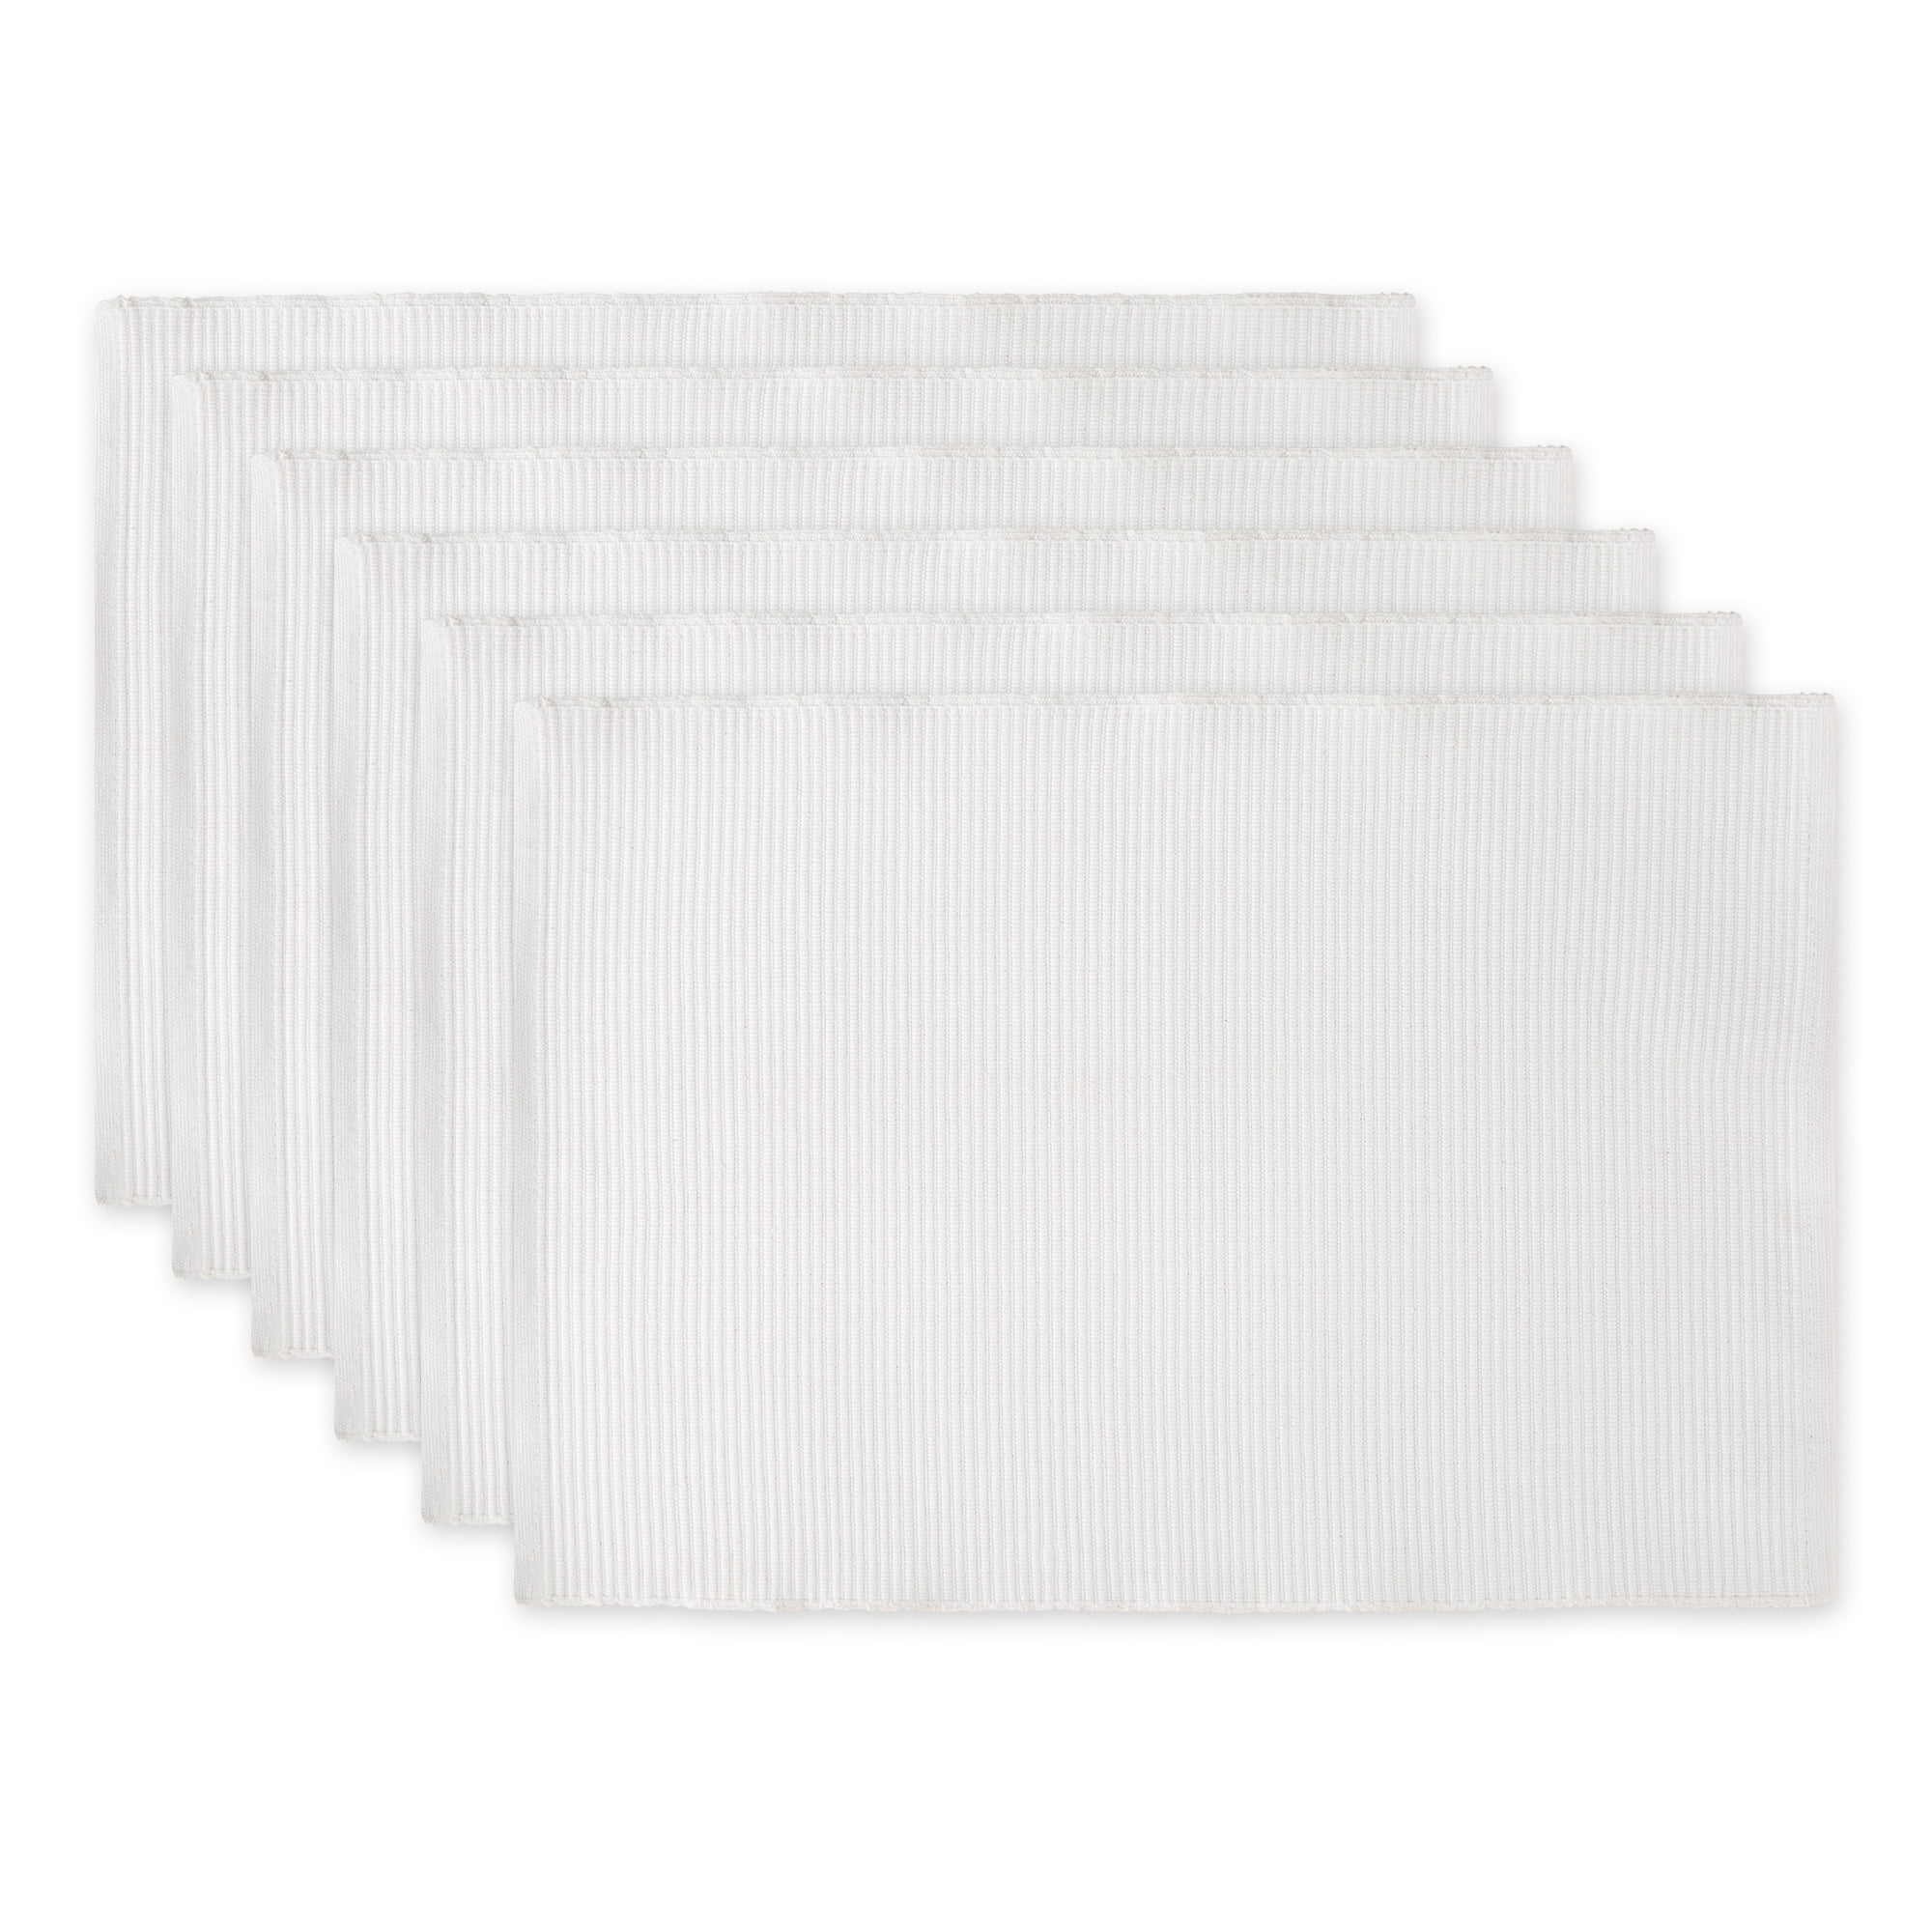 DII Ribbed Kitchen Placemat Set Set Of 6 19 X13 100 Cotton Multiple Colors 52ff1970 1f74 4953 Adb2 D1536c8c1e37.17a349661f1855f28a4b43744c9bde93 